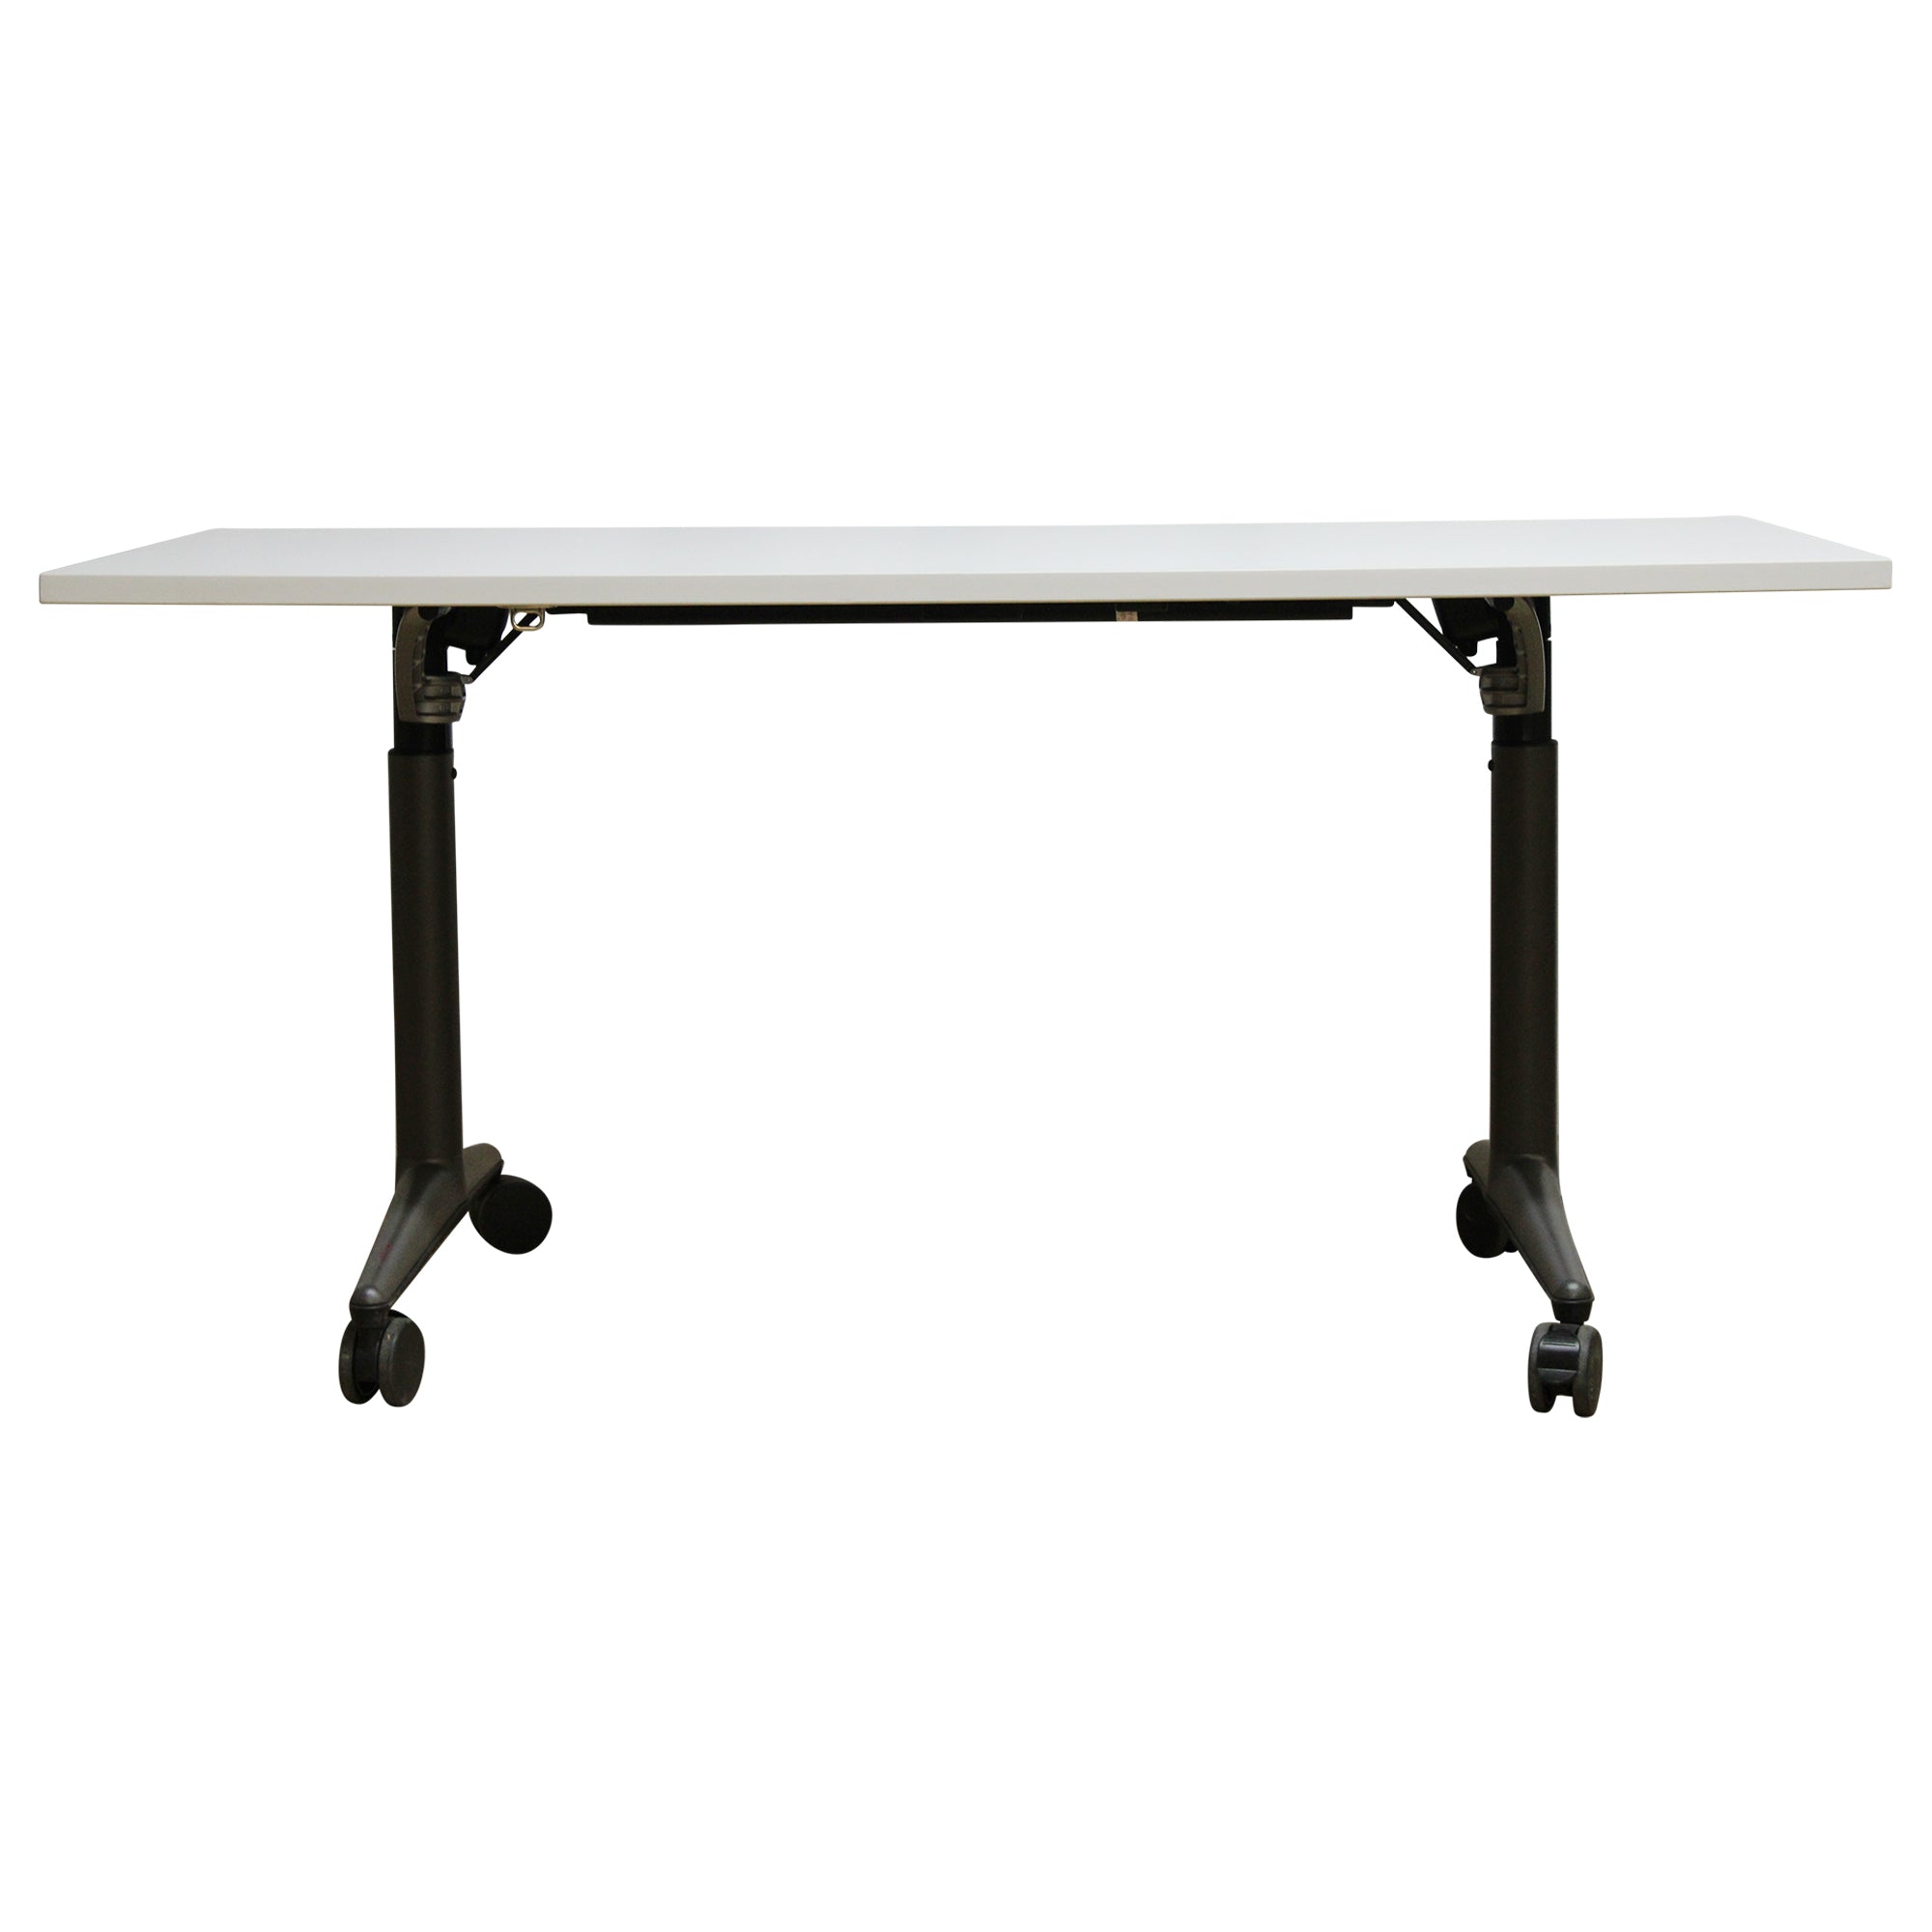 Steelcase Nesting Table, 30 x 60 - Graphite Base - Preowned